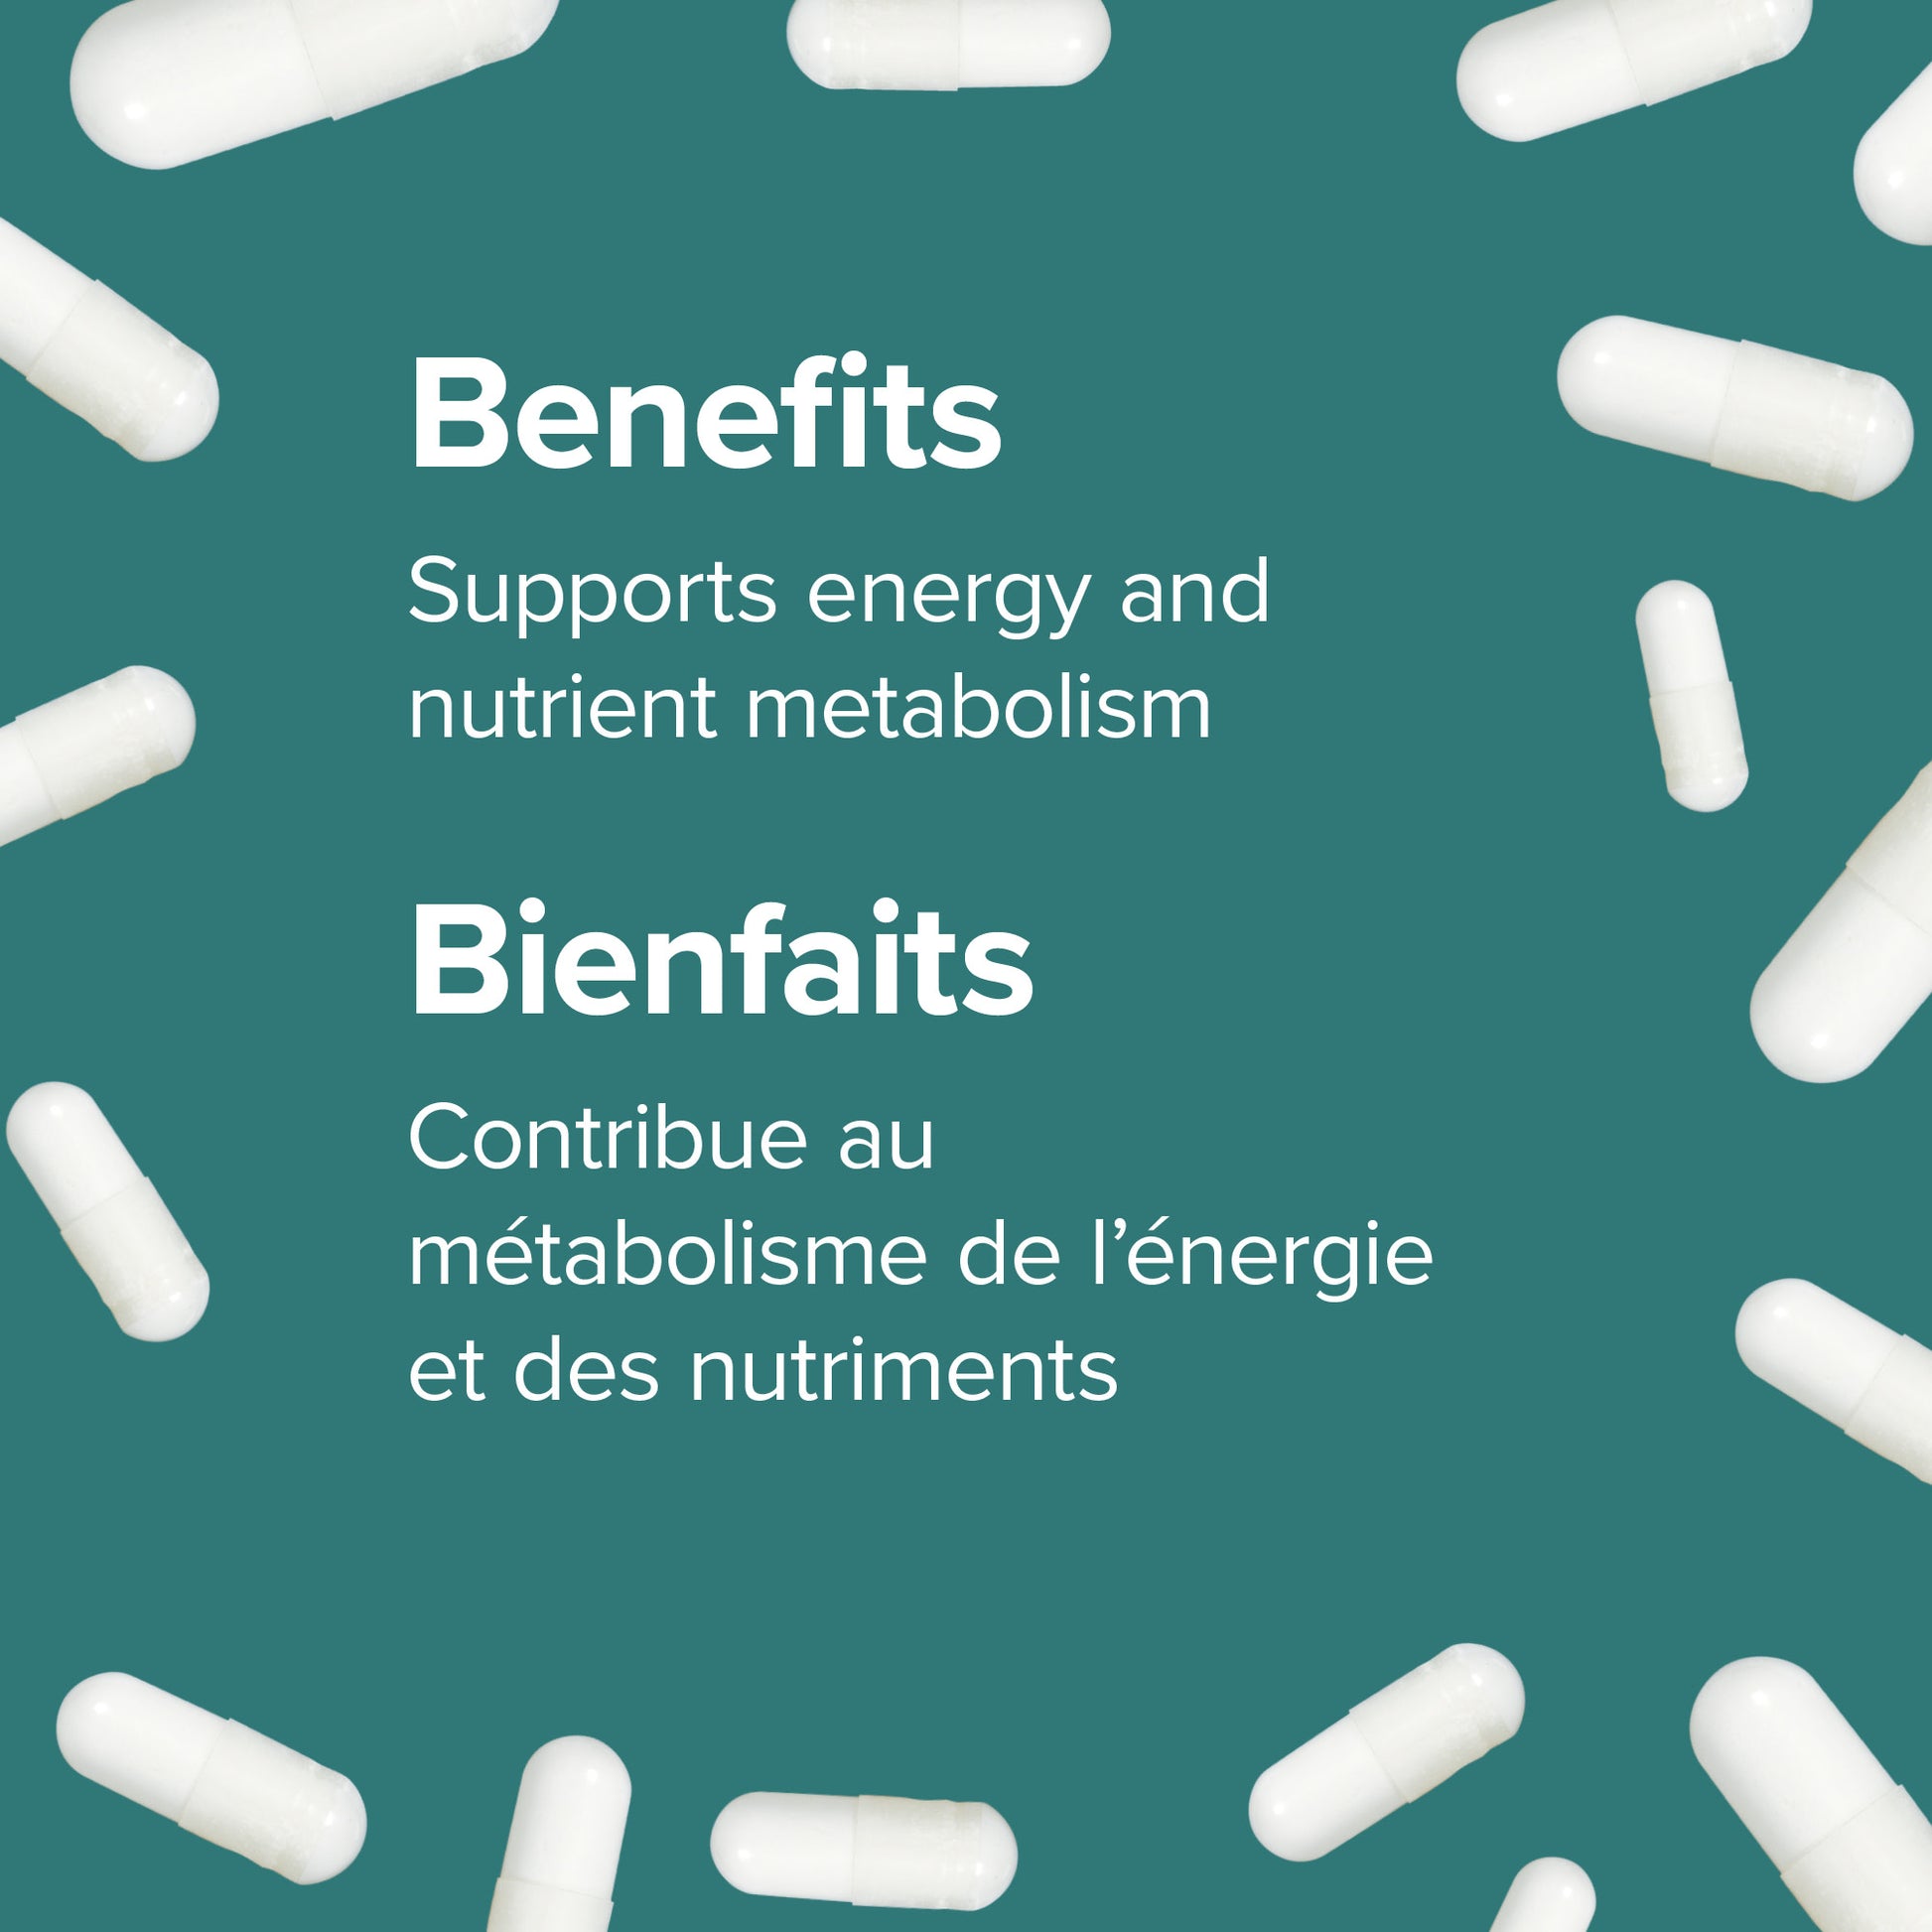 specifications-Sans rougeurs Niacine 500 mg for Webber Naturals